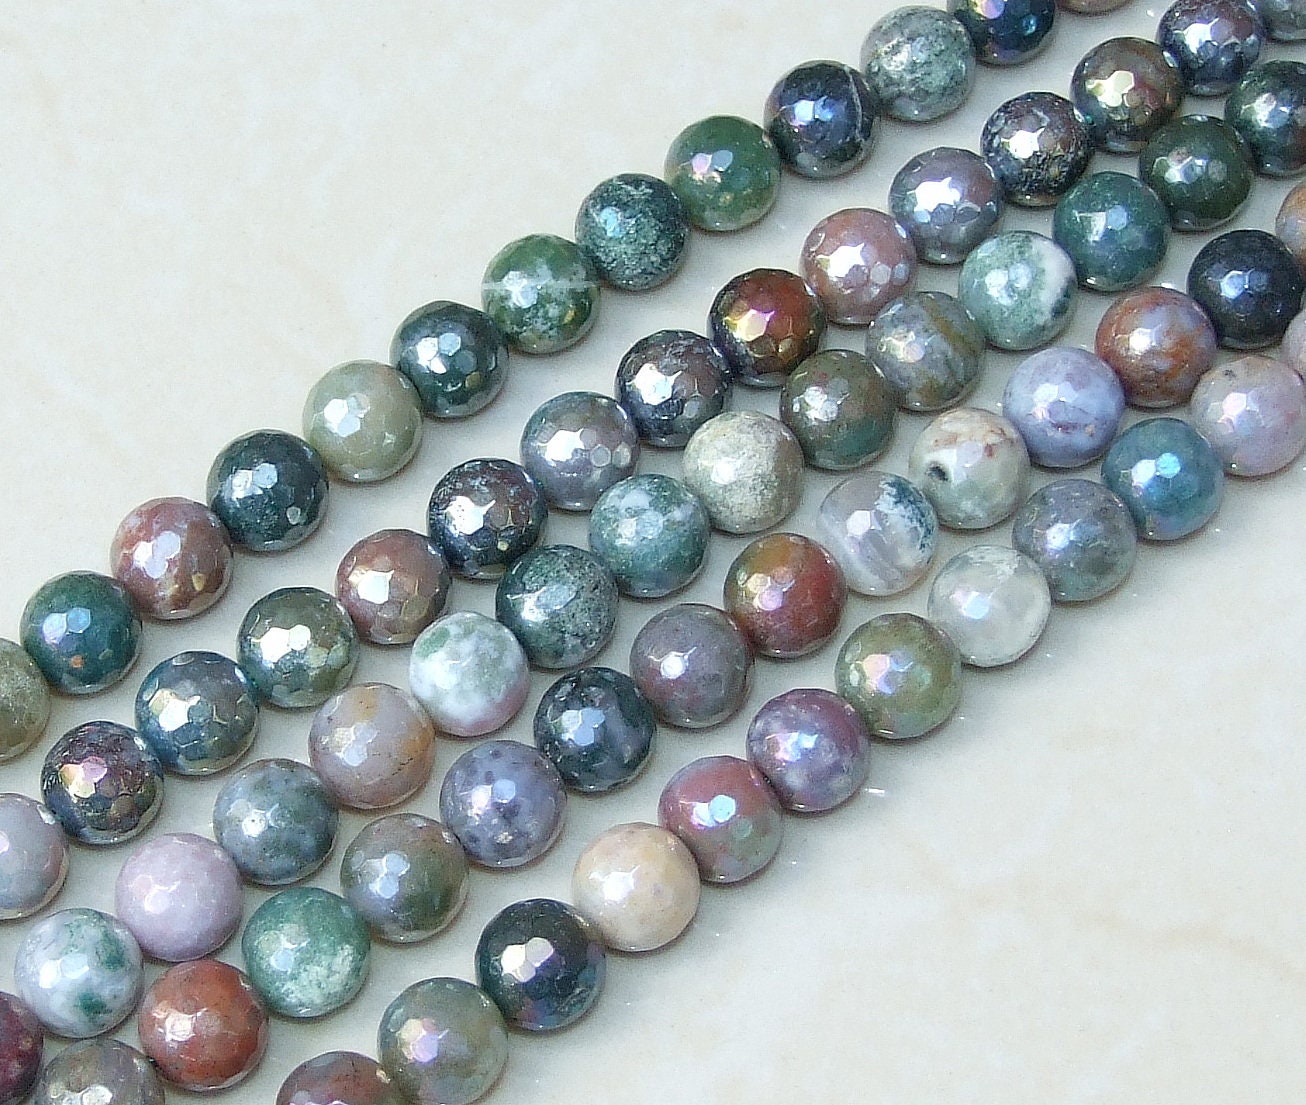 Ocean Jasper Beads, Electroplated Beads Strand Wholesale, 10mm , Ocean Jasper Strand, Round Jasper Beads Teal, Faceted Gemstone Beads